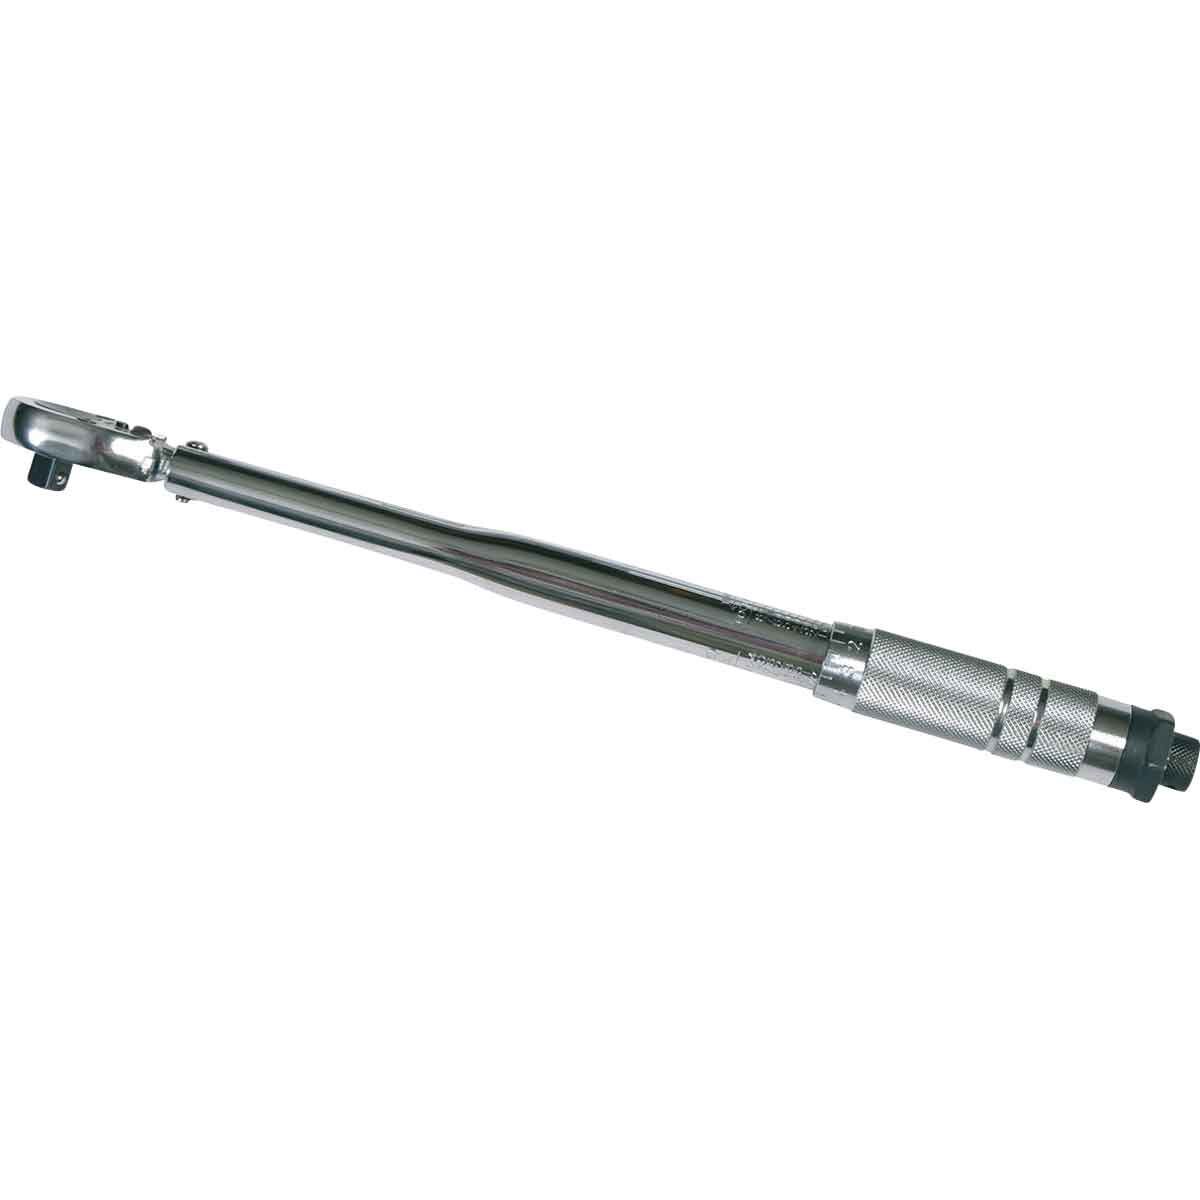 7455-200  Bahco Click Torque Wrench, 40 → 200Nm, 1/2 in Drive